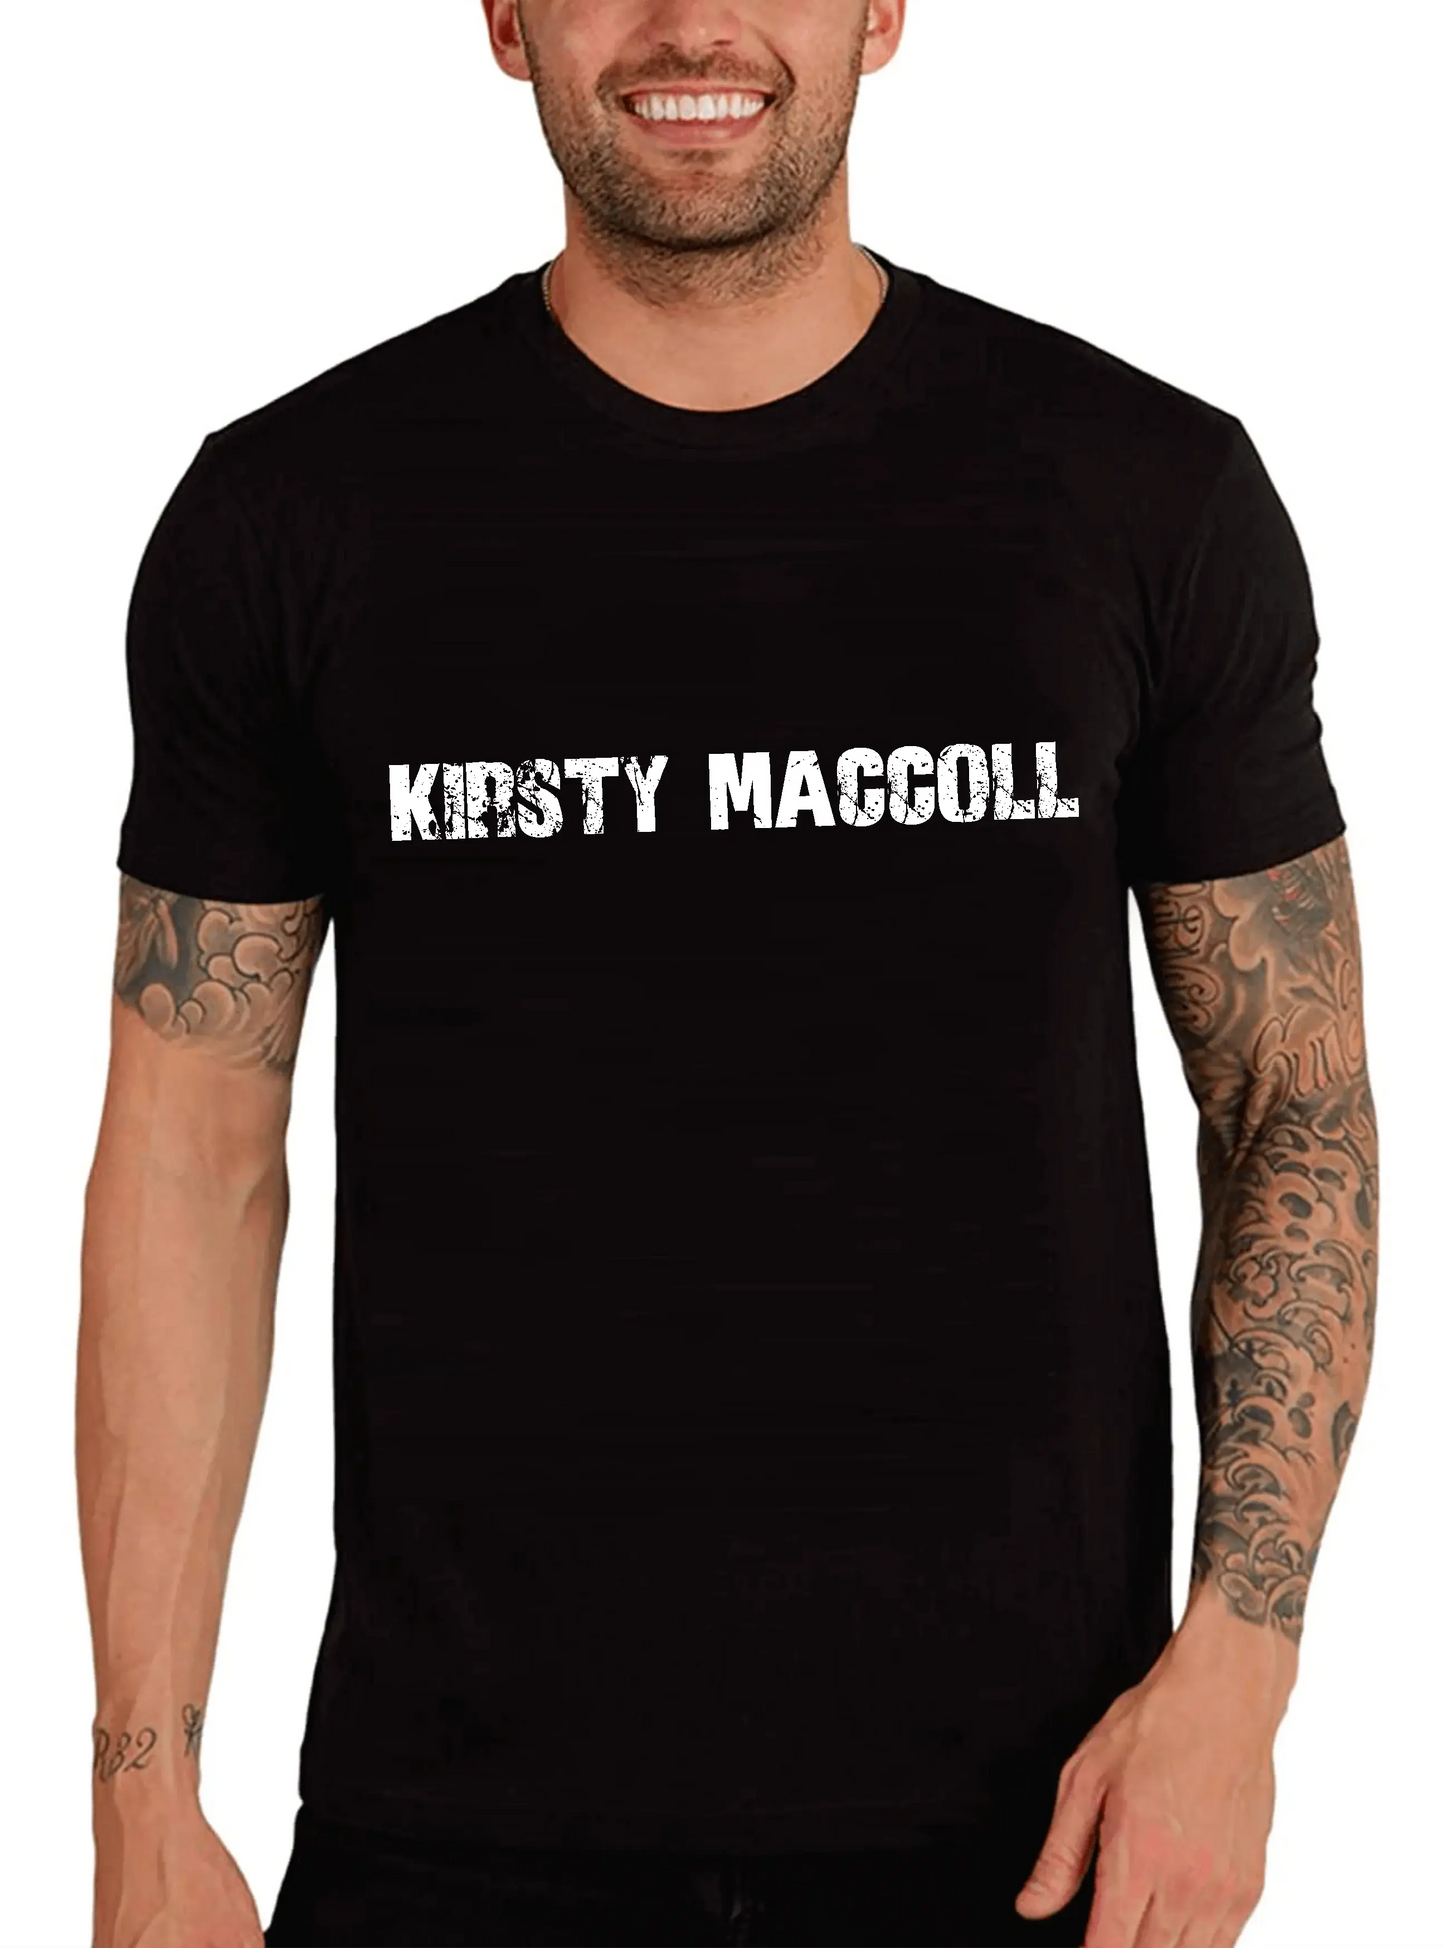 Men's Graphic T-Shirt Kirsty Maccoll Eco-Friendly Limited Edition Short Sleeve Tee-Shirt Vintage Birthday Gift Novelty